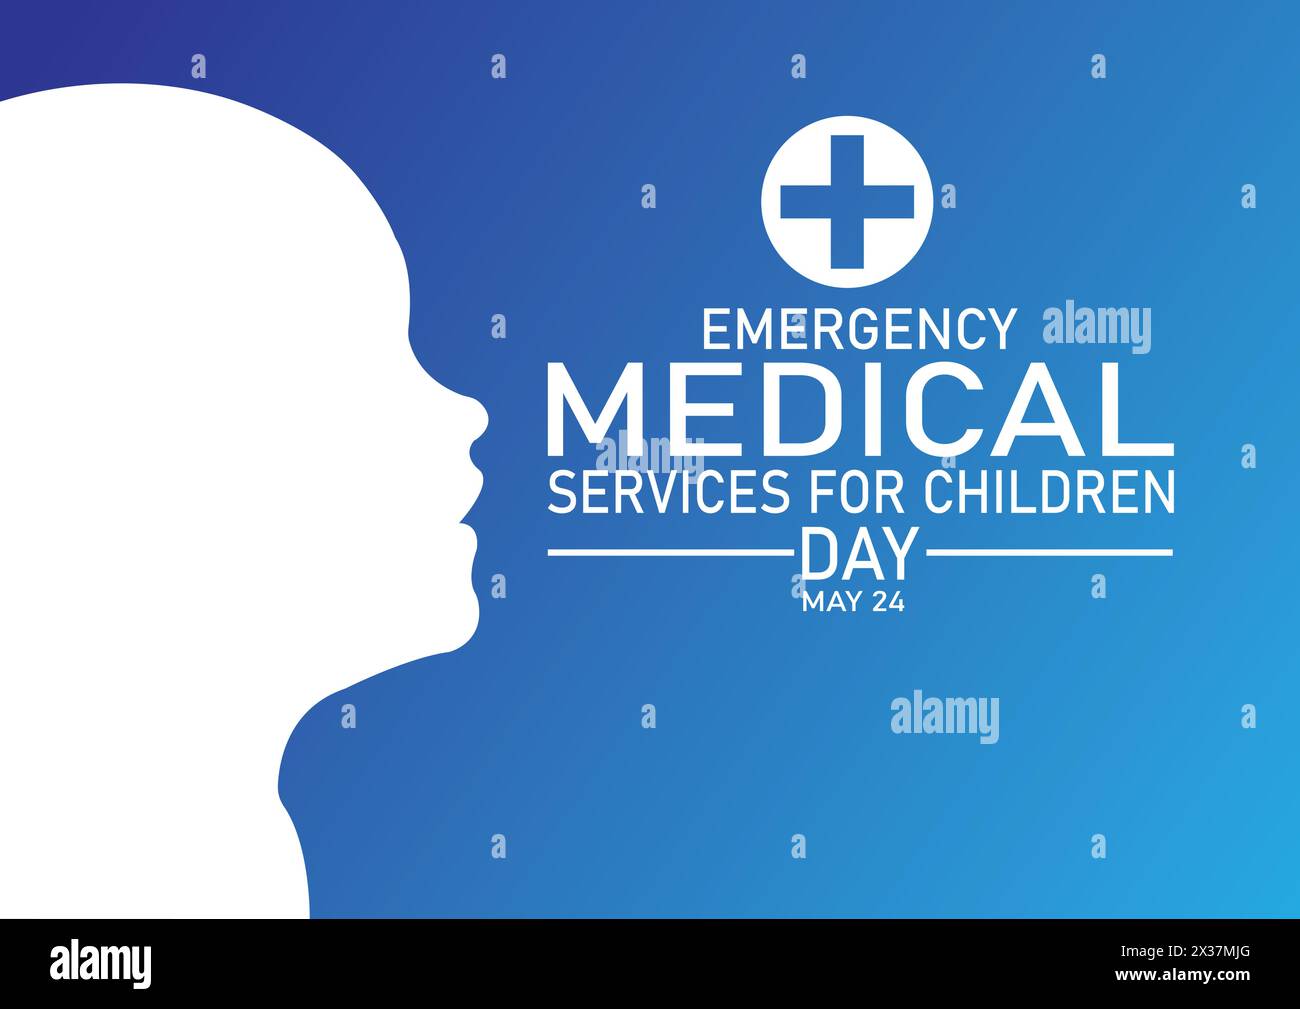 Emergency Medical Services For Children Day wallpaper with shapes and typography, banner, card, poster, template. Stock Vector